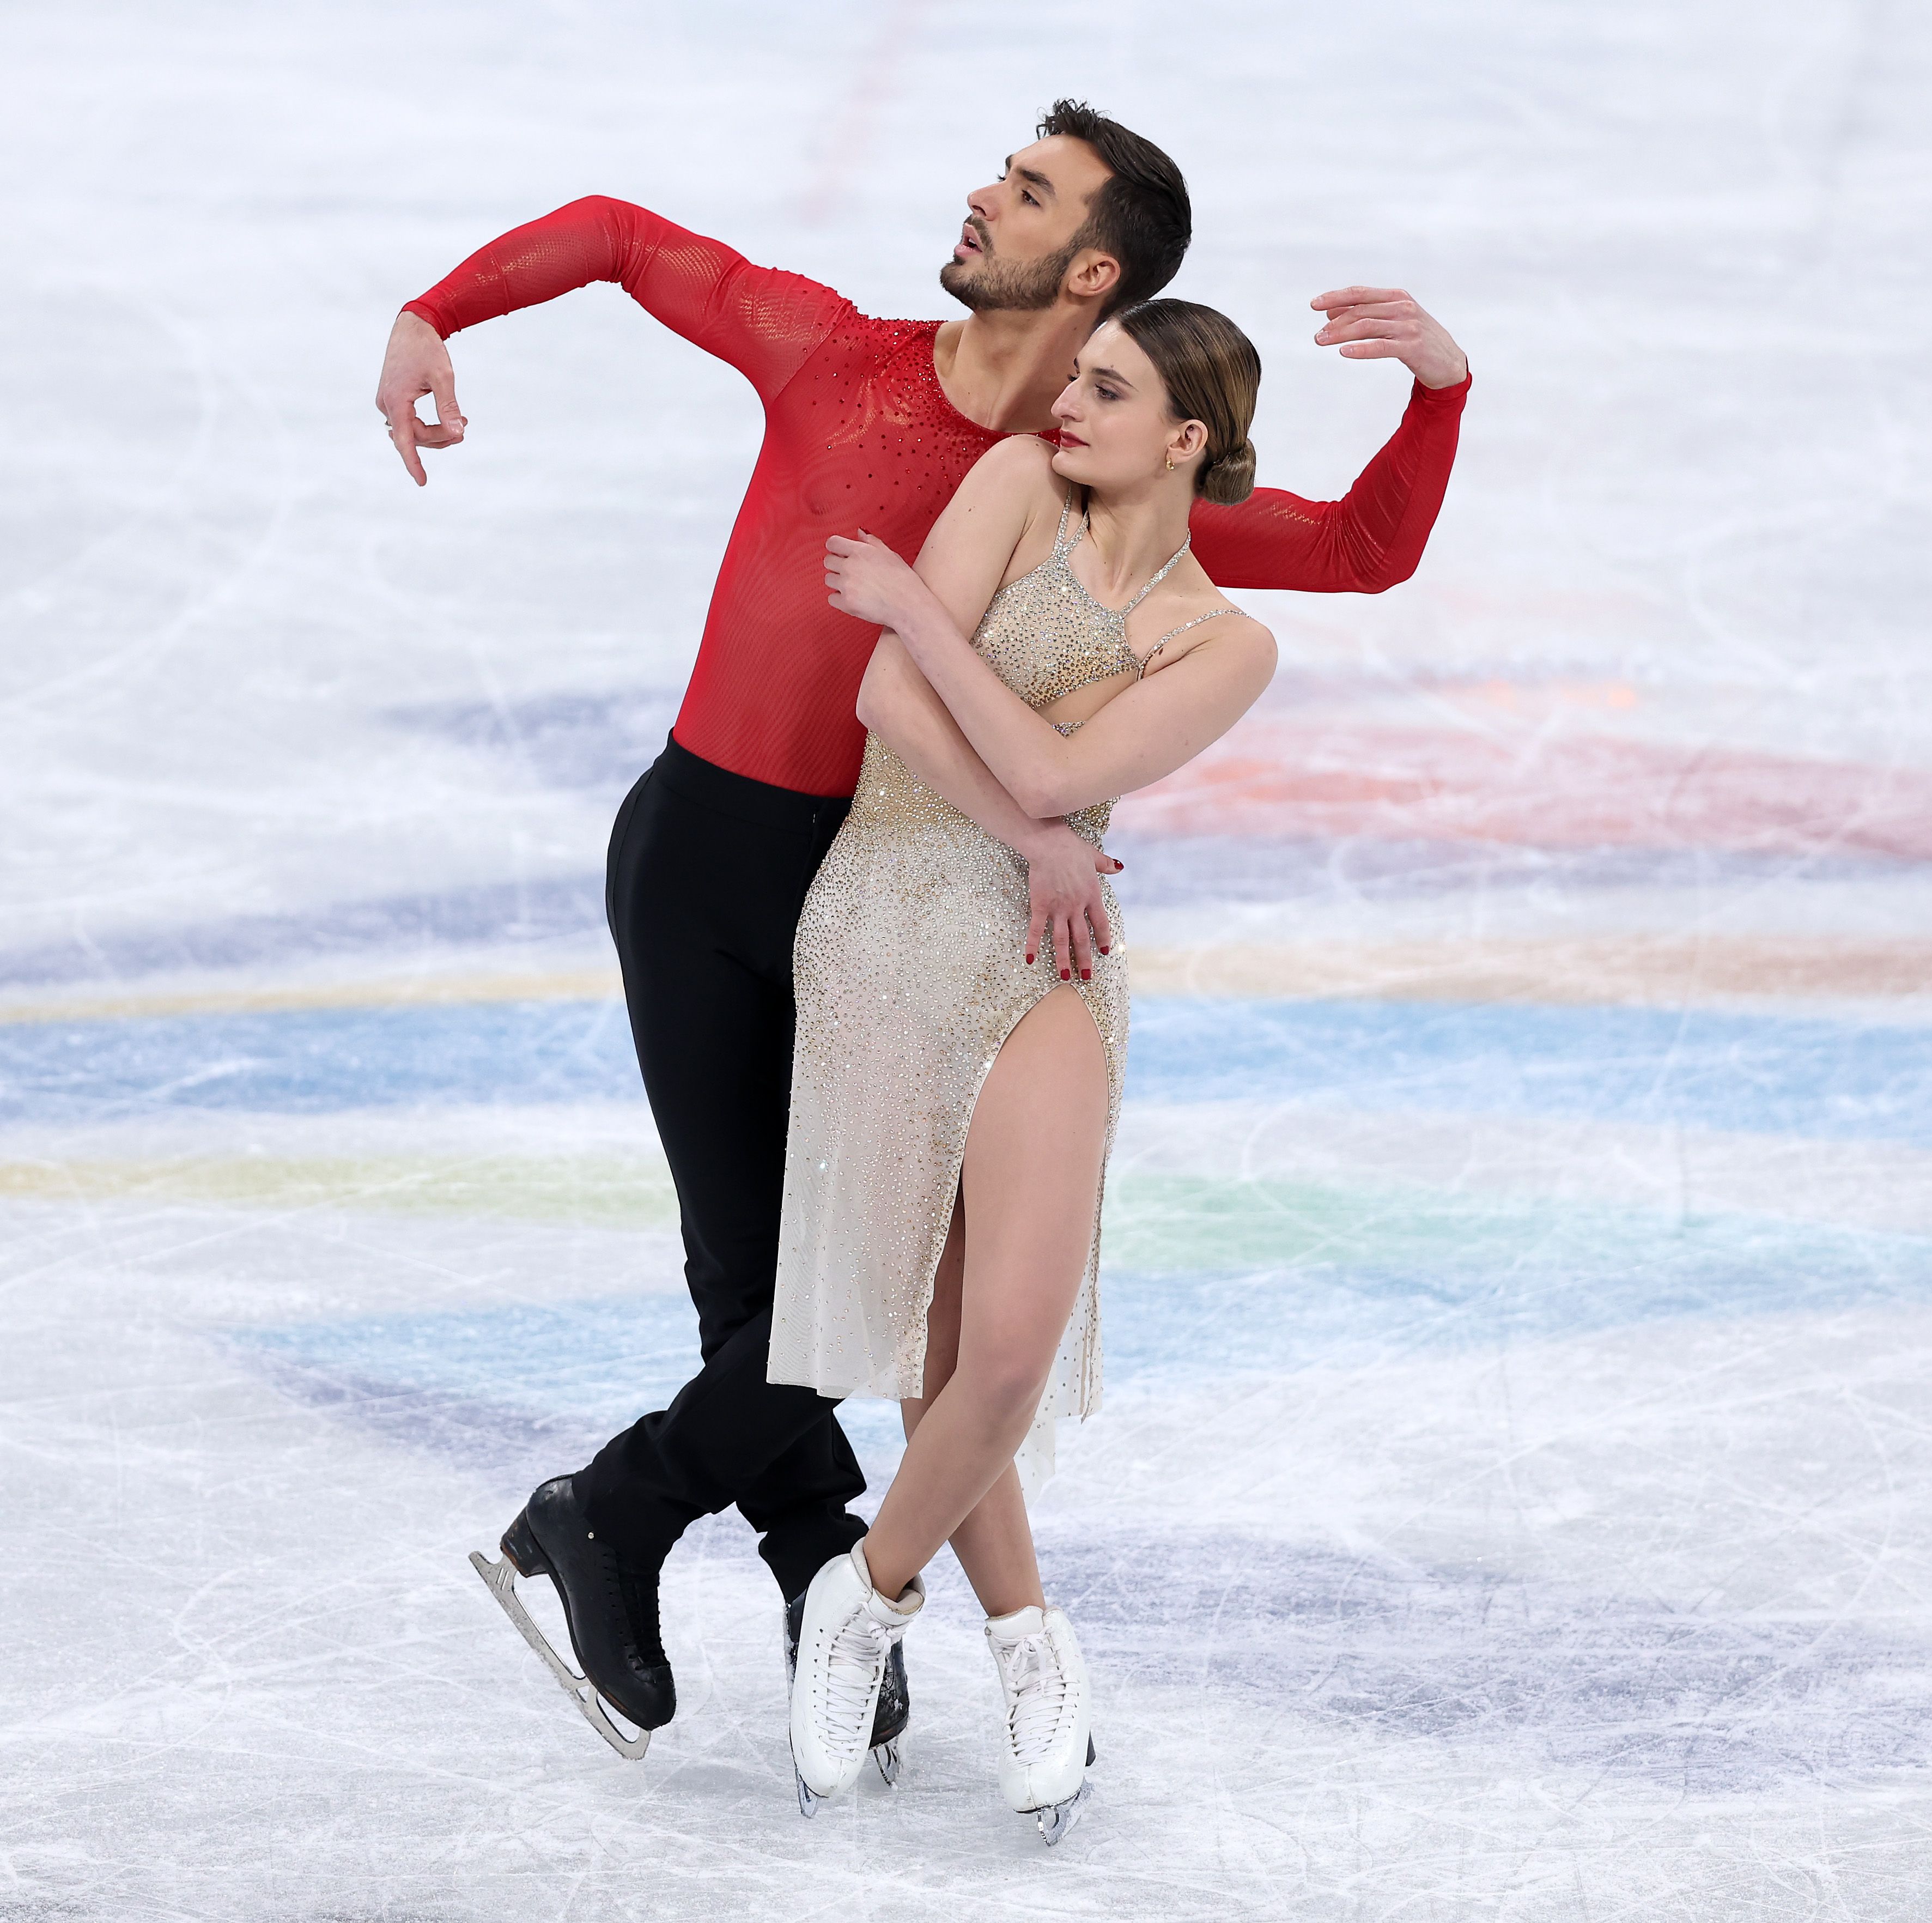 Exclusive: Gabriella Papadakis and Guillaume Cizeron Finally Won Olympic Gold, and 'On Edge' Captured It All